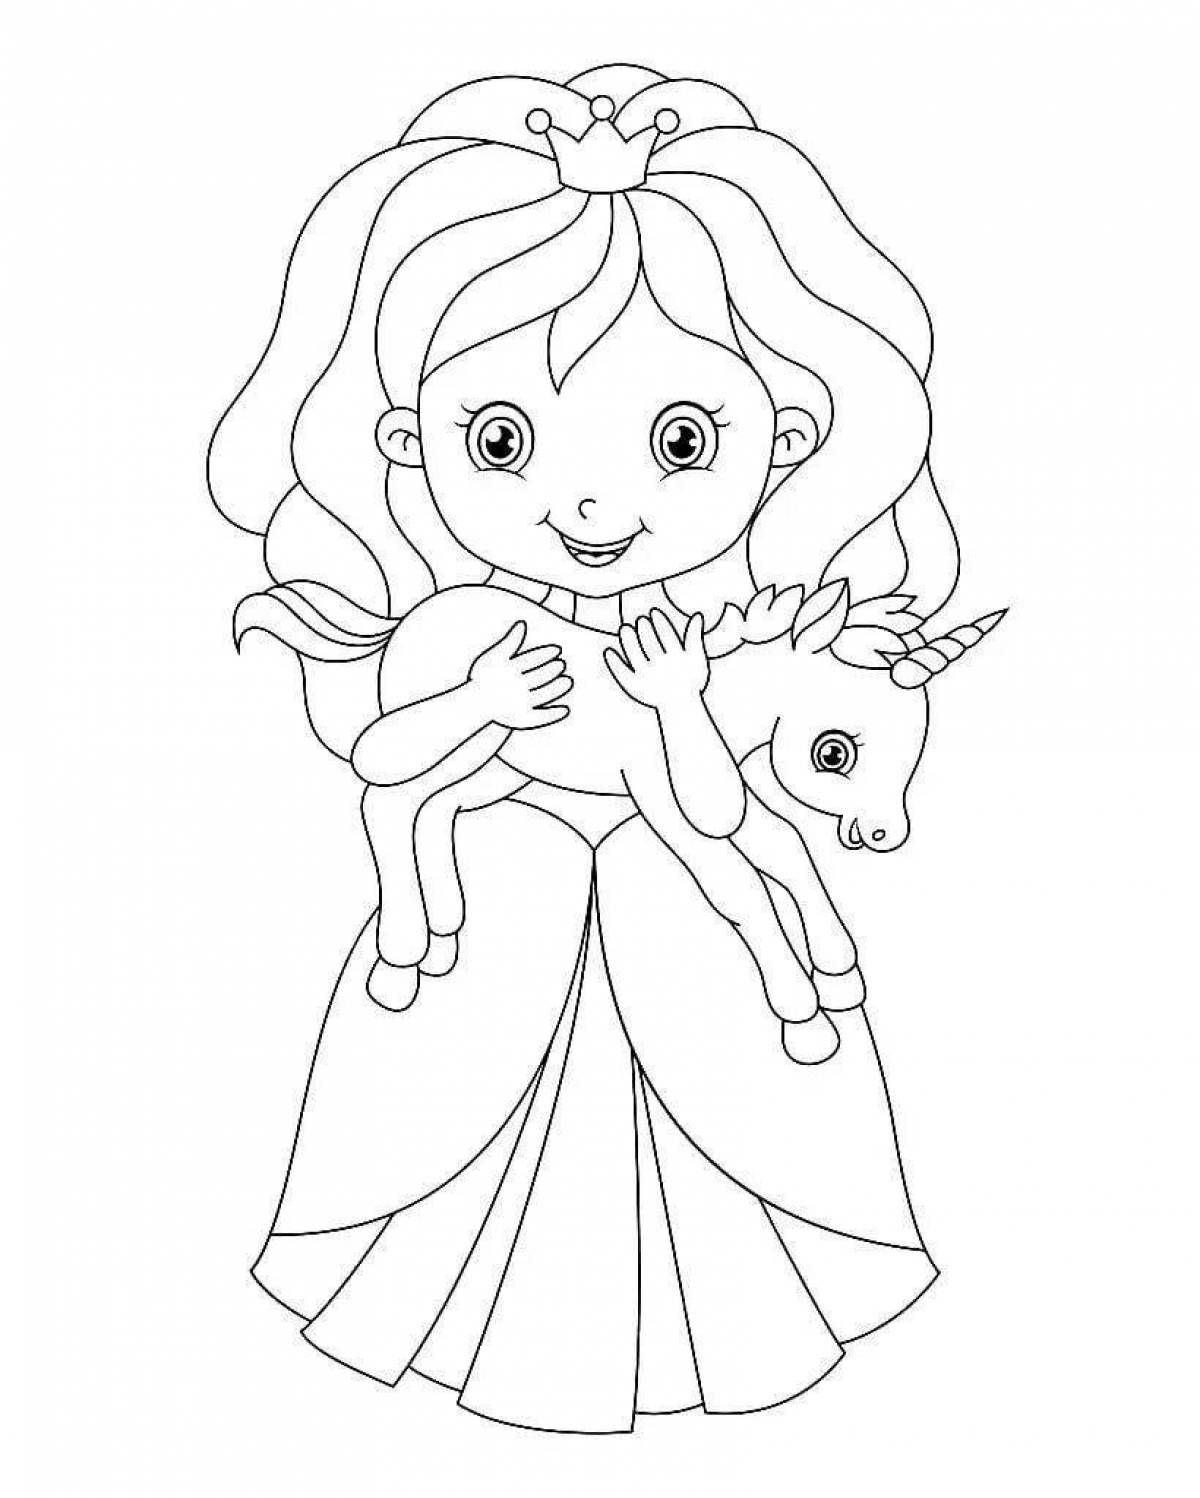 Exquisite princess coloring book for kids